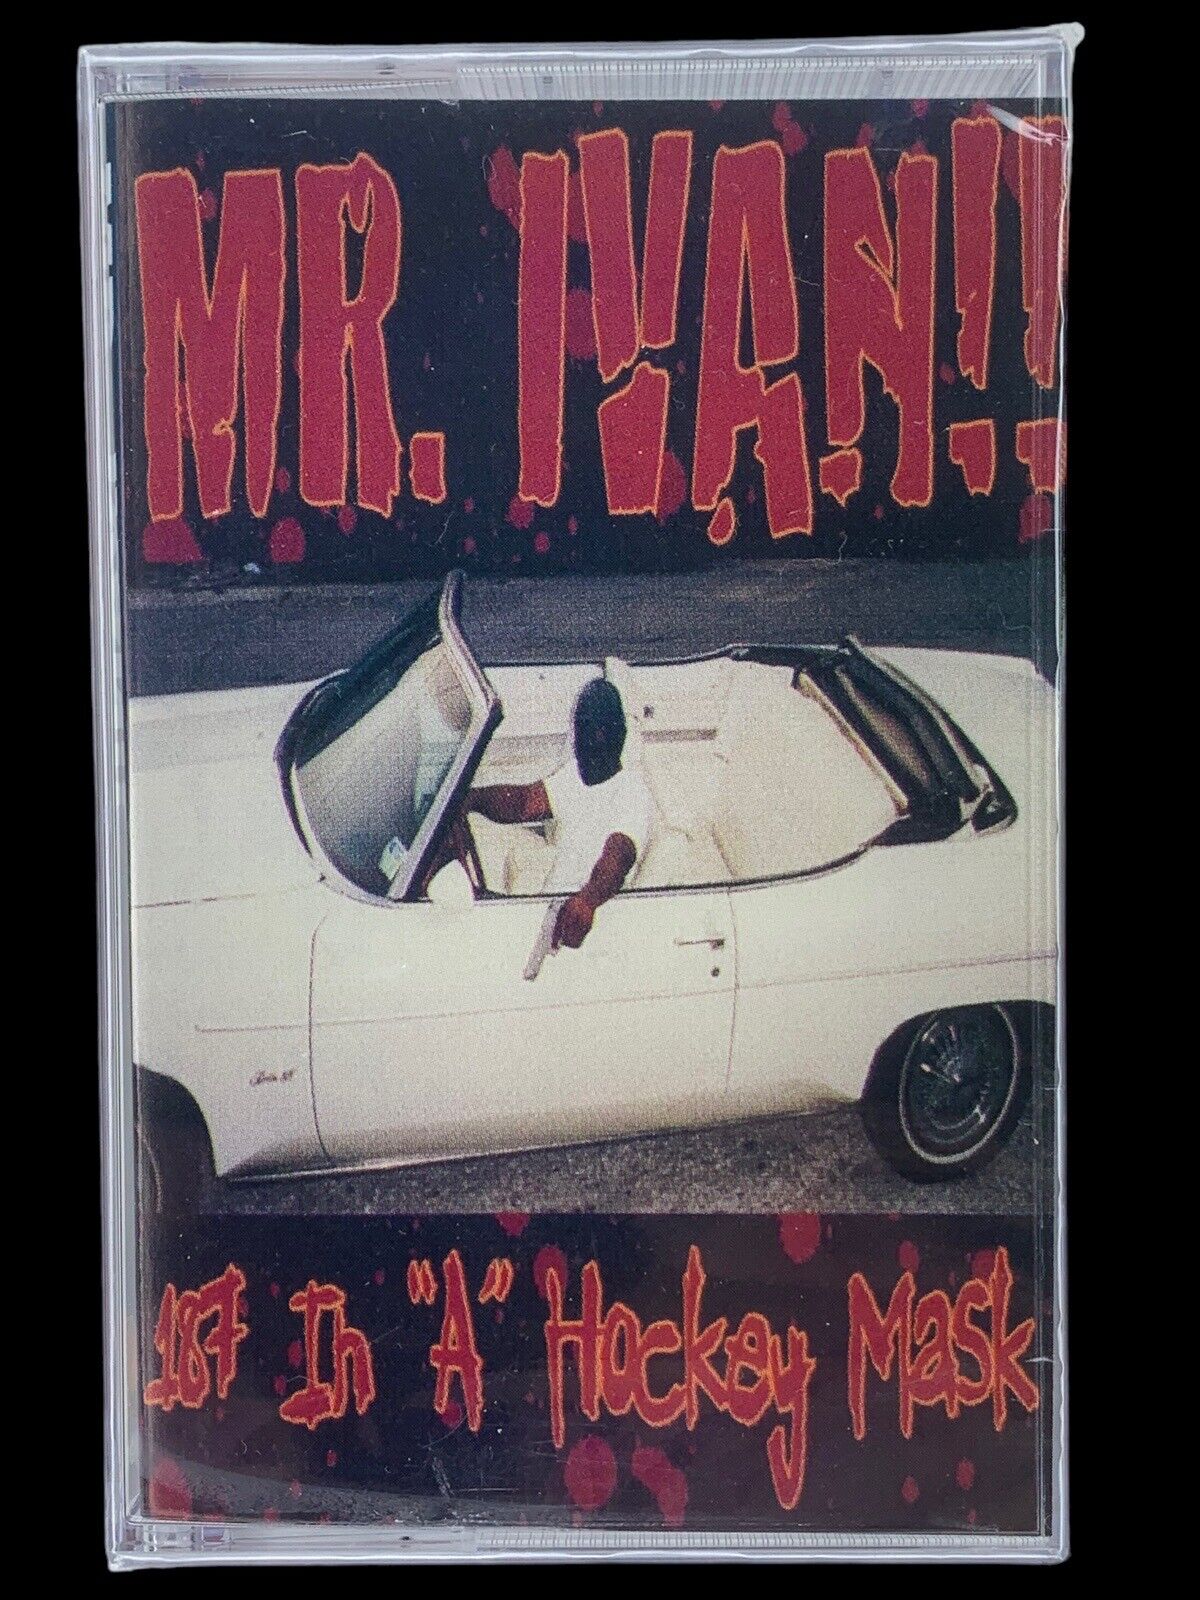 SEALED, Mr. Ivan – 187 in a Hockey Mask CSH-7000, audio cassette, RARE, US, 1997